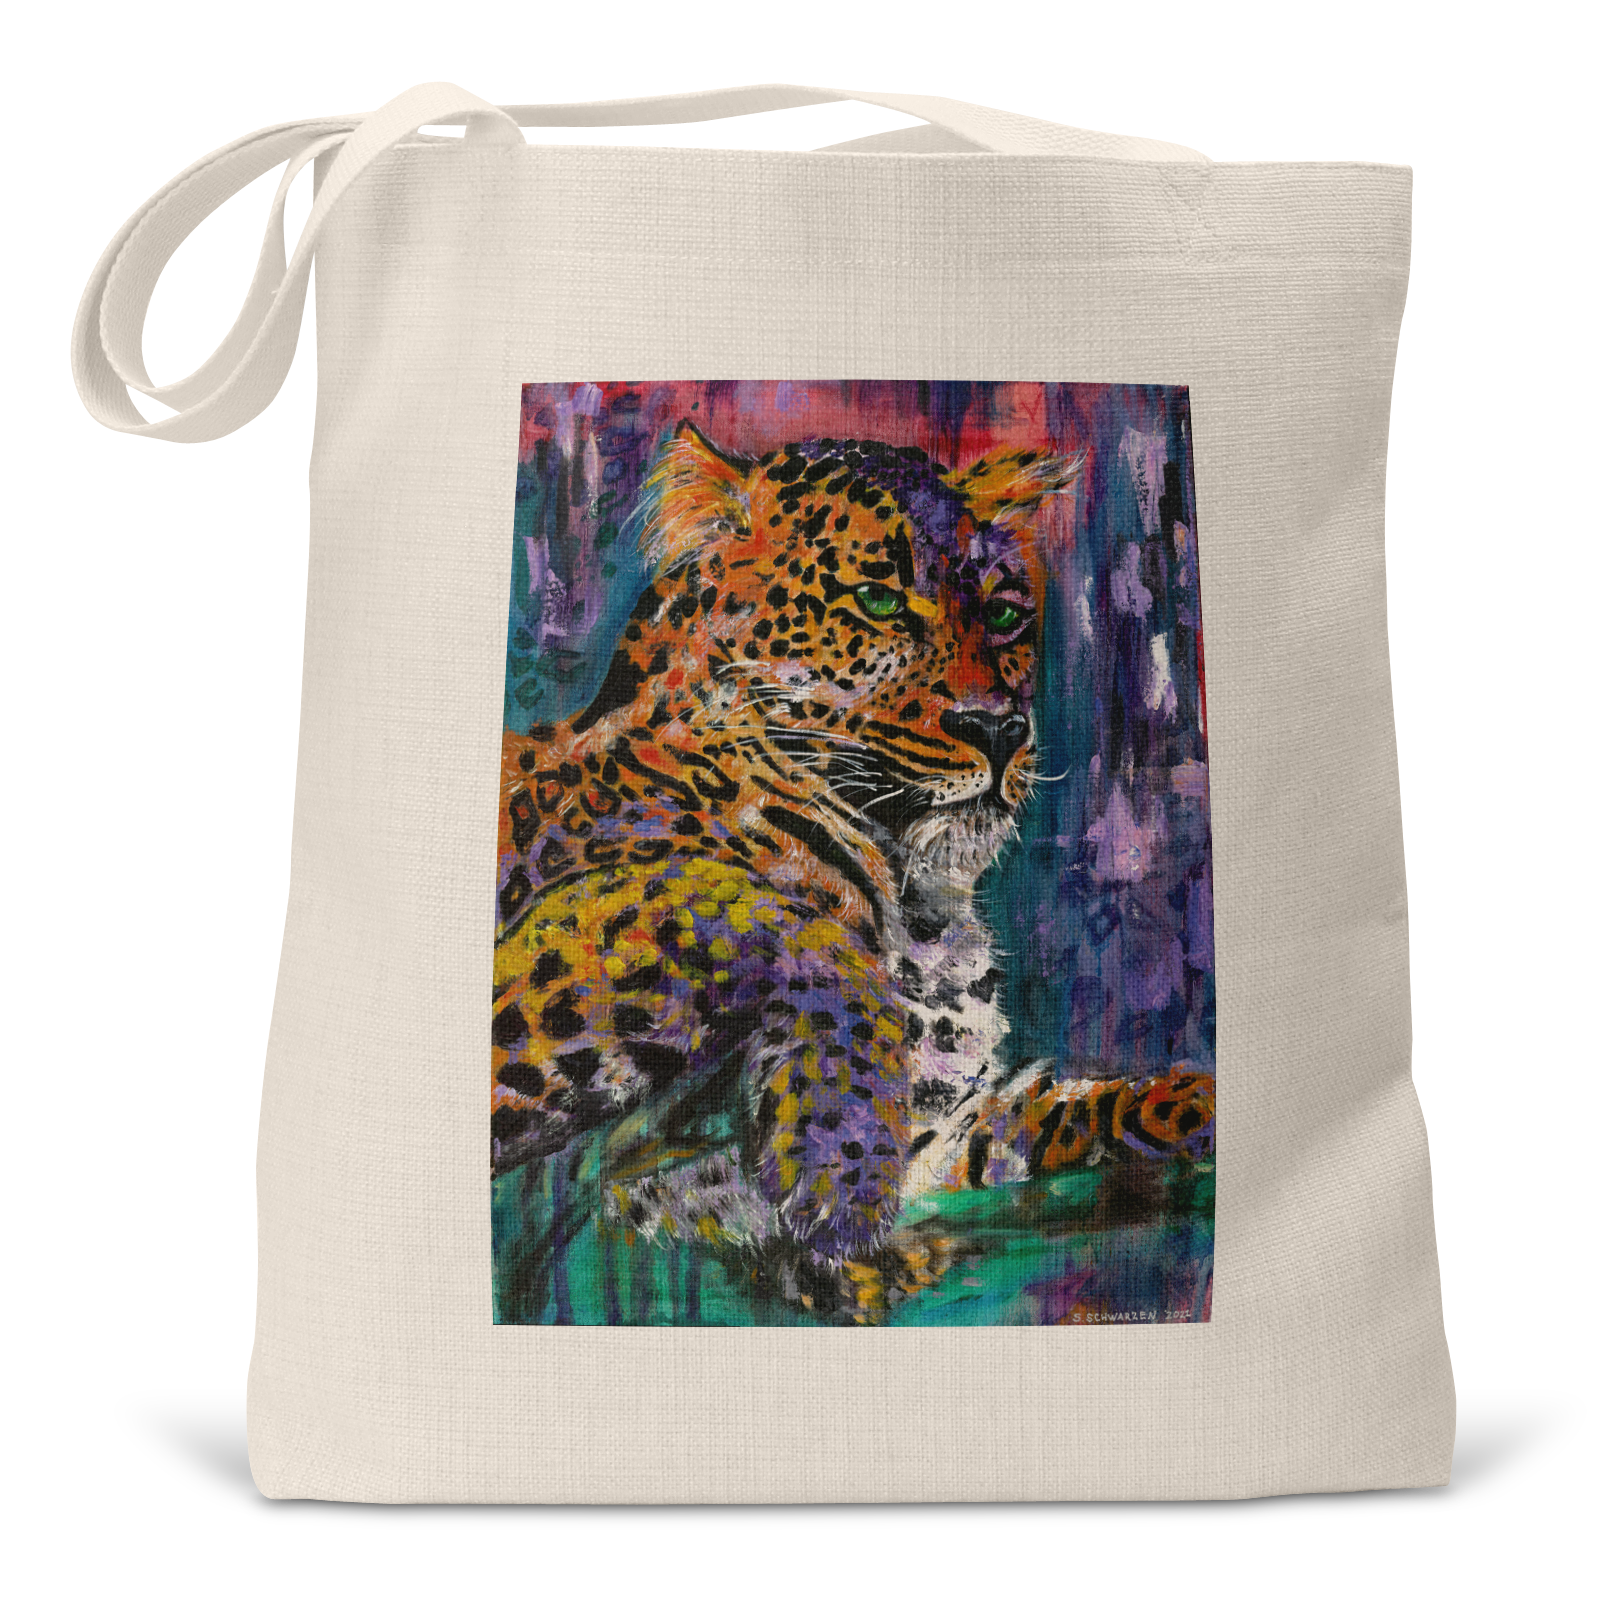 "Ava the Royal Leopard" - Small Tote